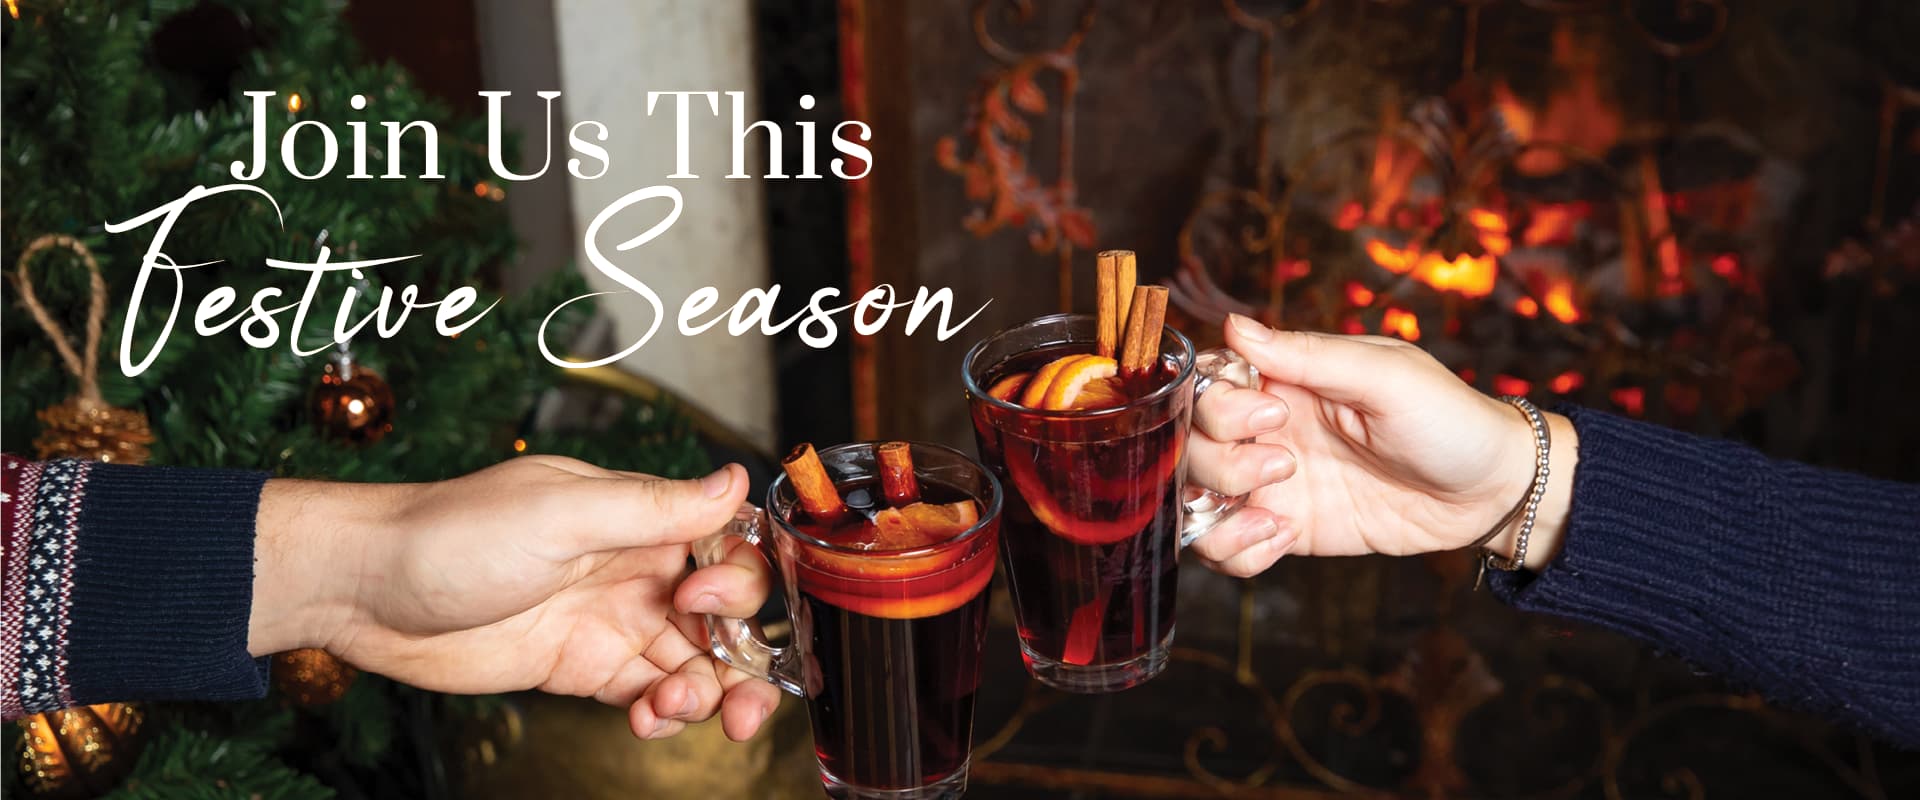 join us this festive season at Danson Stables | Mulled Wine